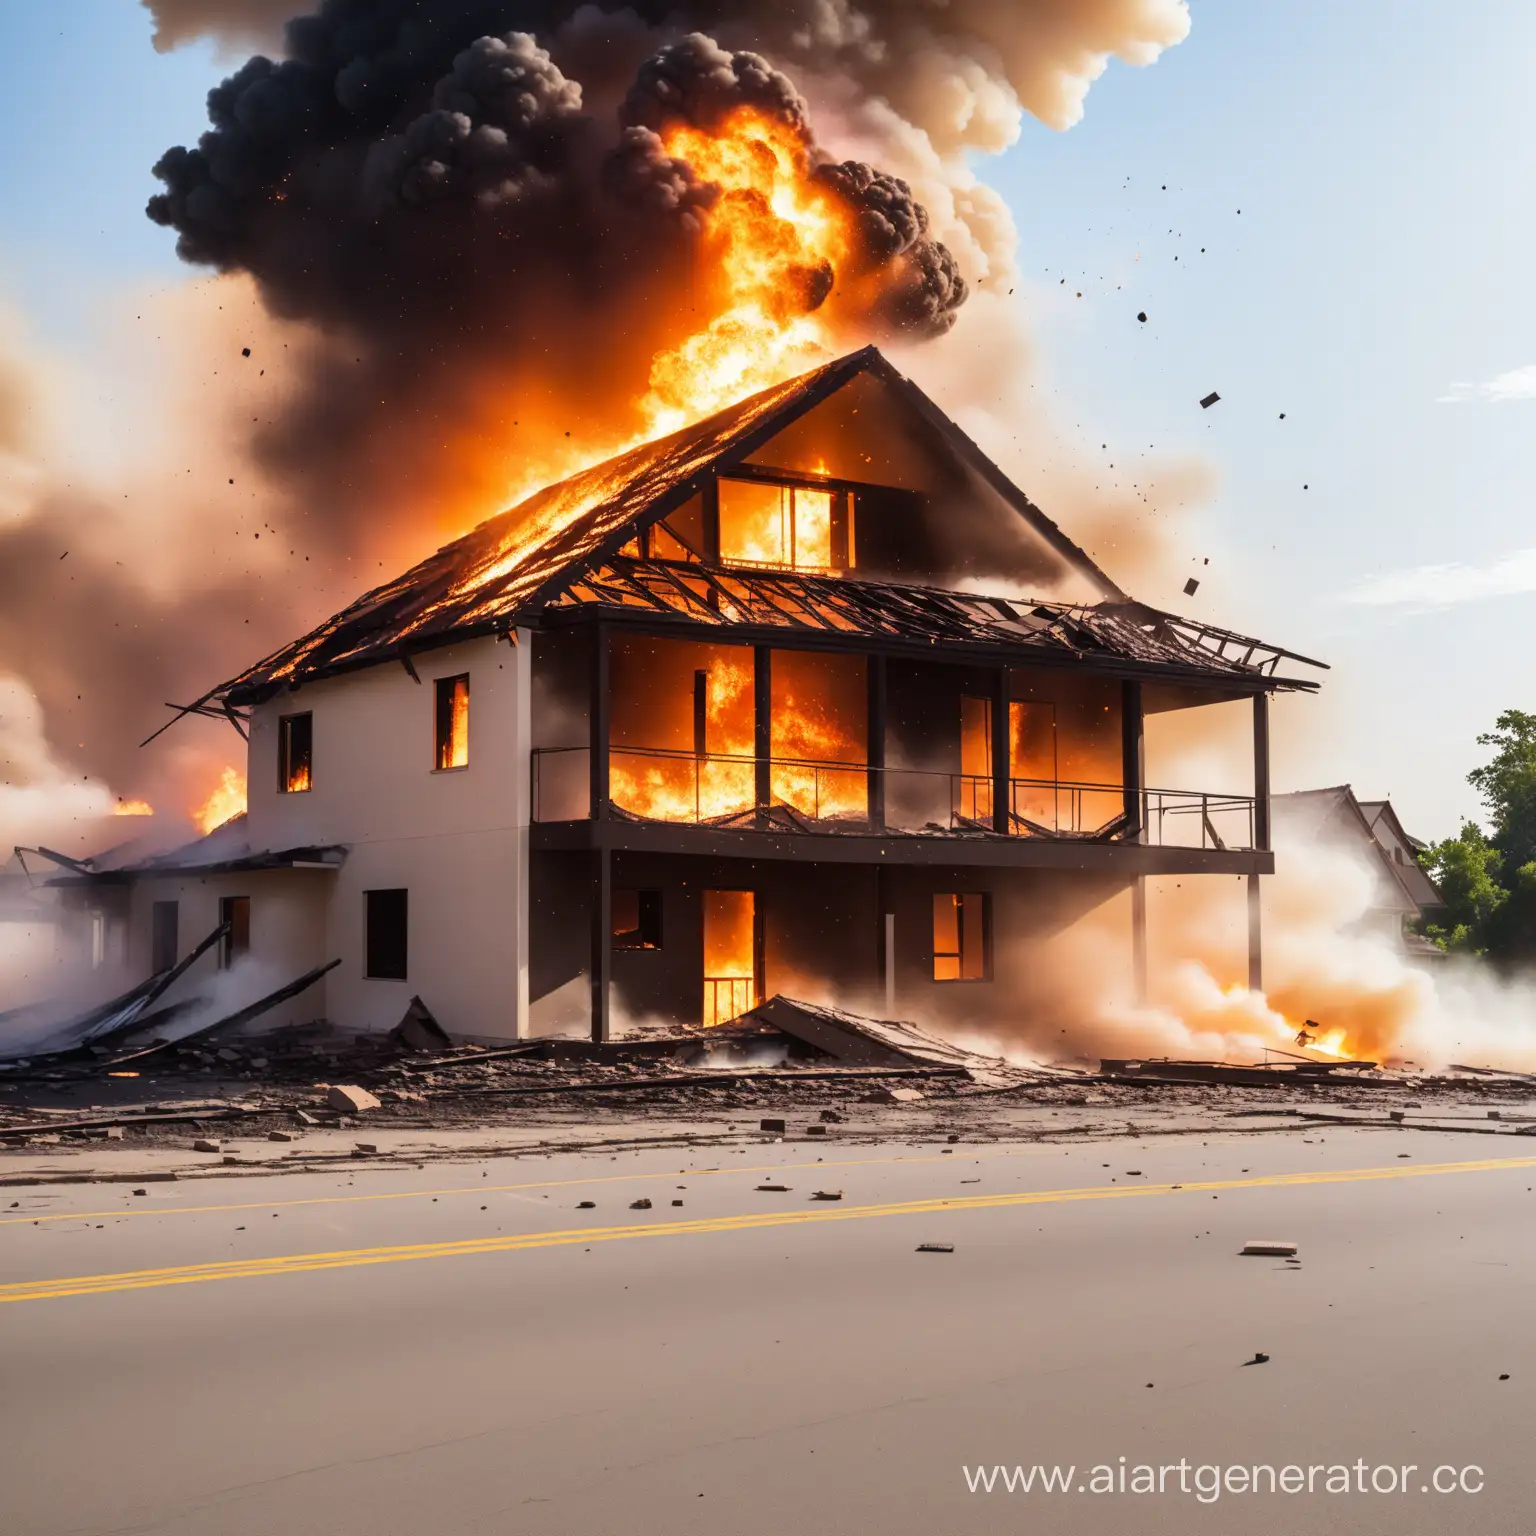 Dramatic-House-Explosion-with-Debris-and-Fire